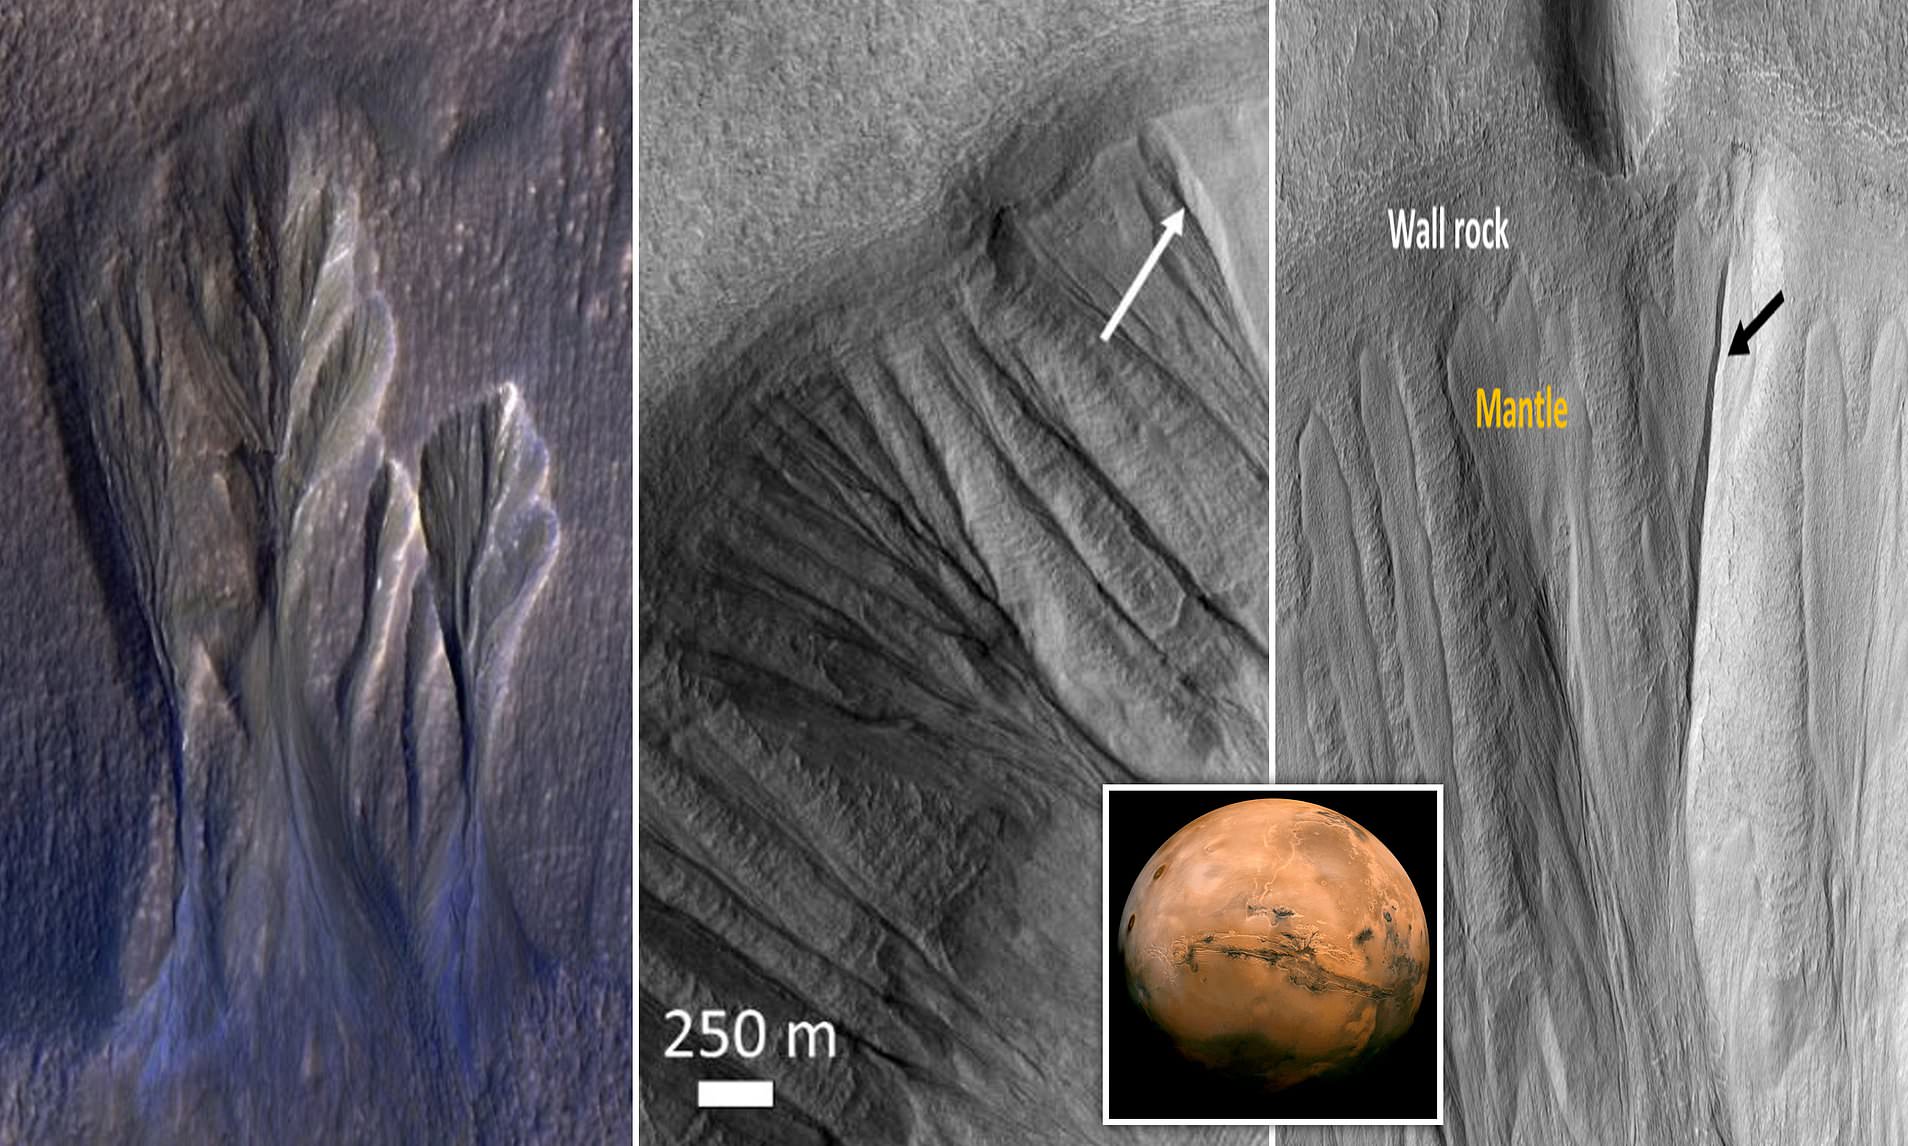 what are the ice caps on the planet mars made of and what happens when the ice caps on mars melt